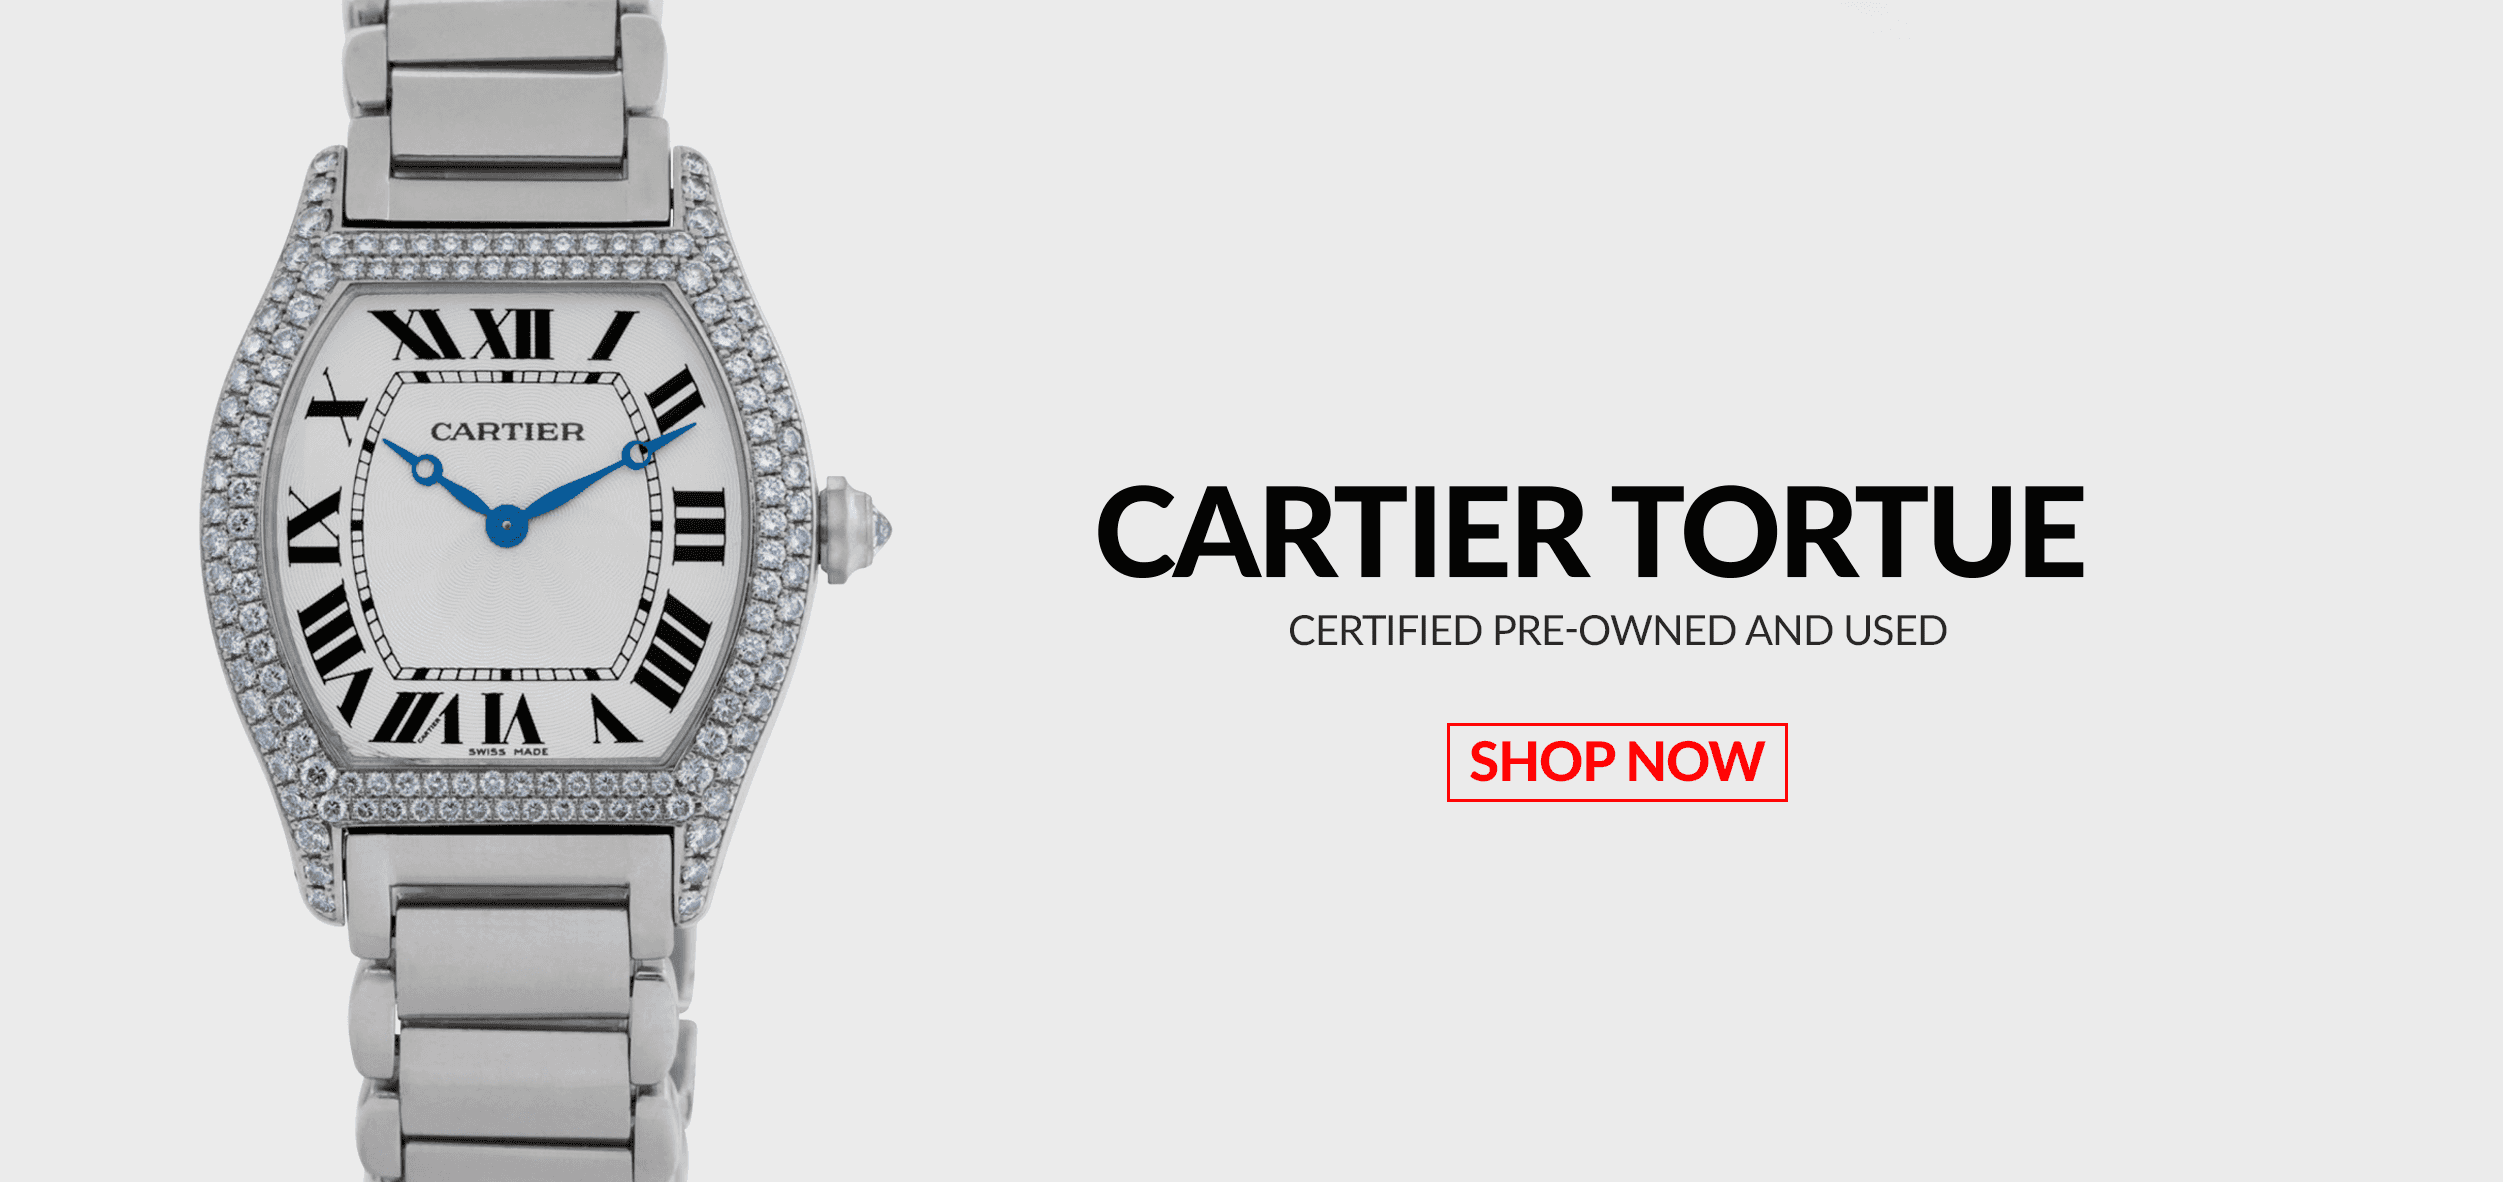 Pre-Owned Certified Used Cartier Tortue Header